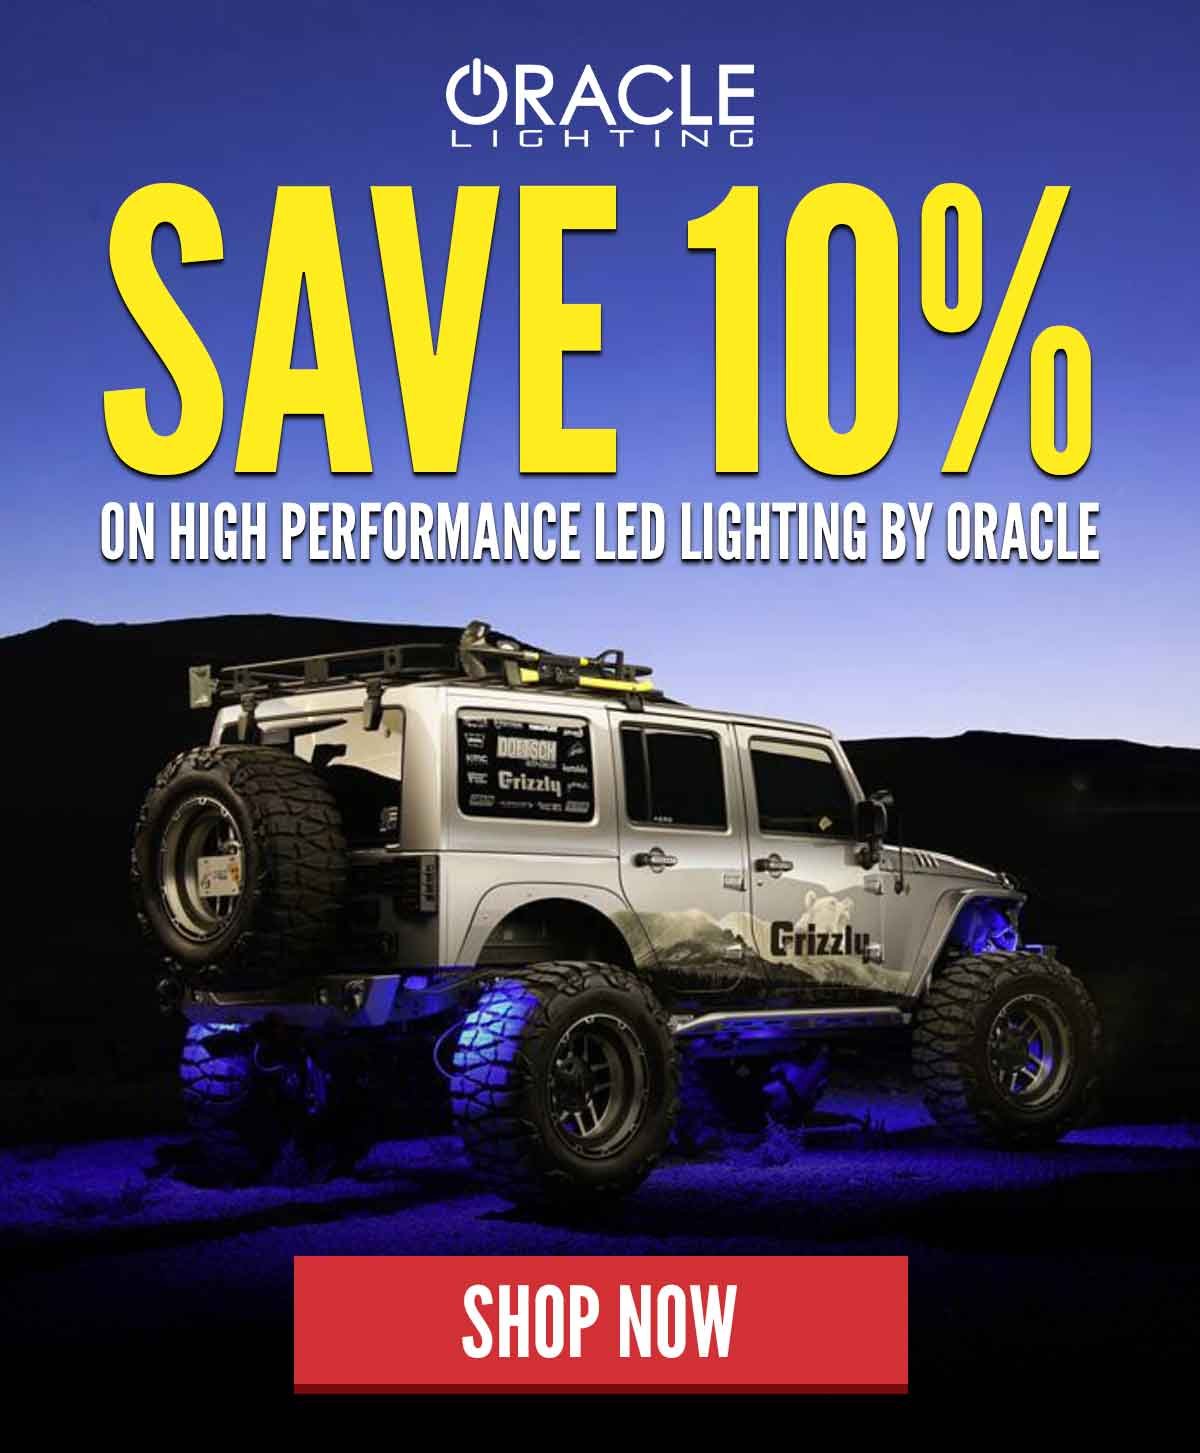 Save 10% On High Performance LED Lighting By Oracle